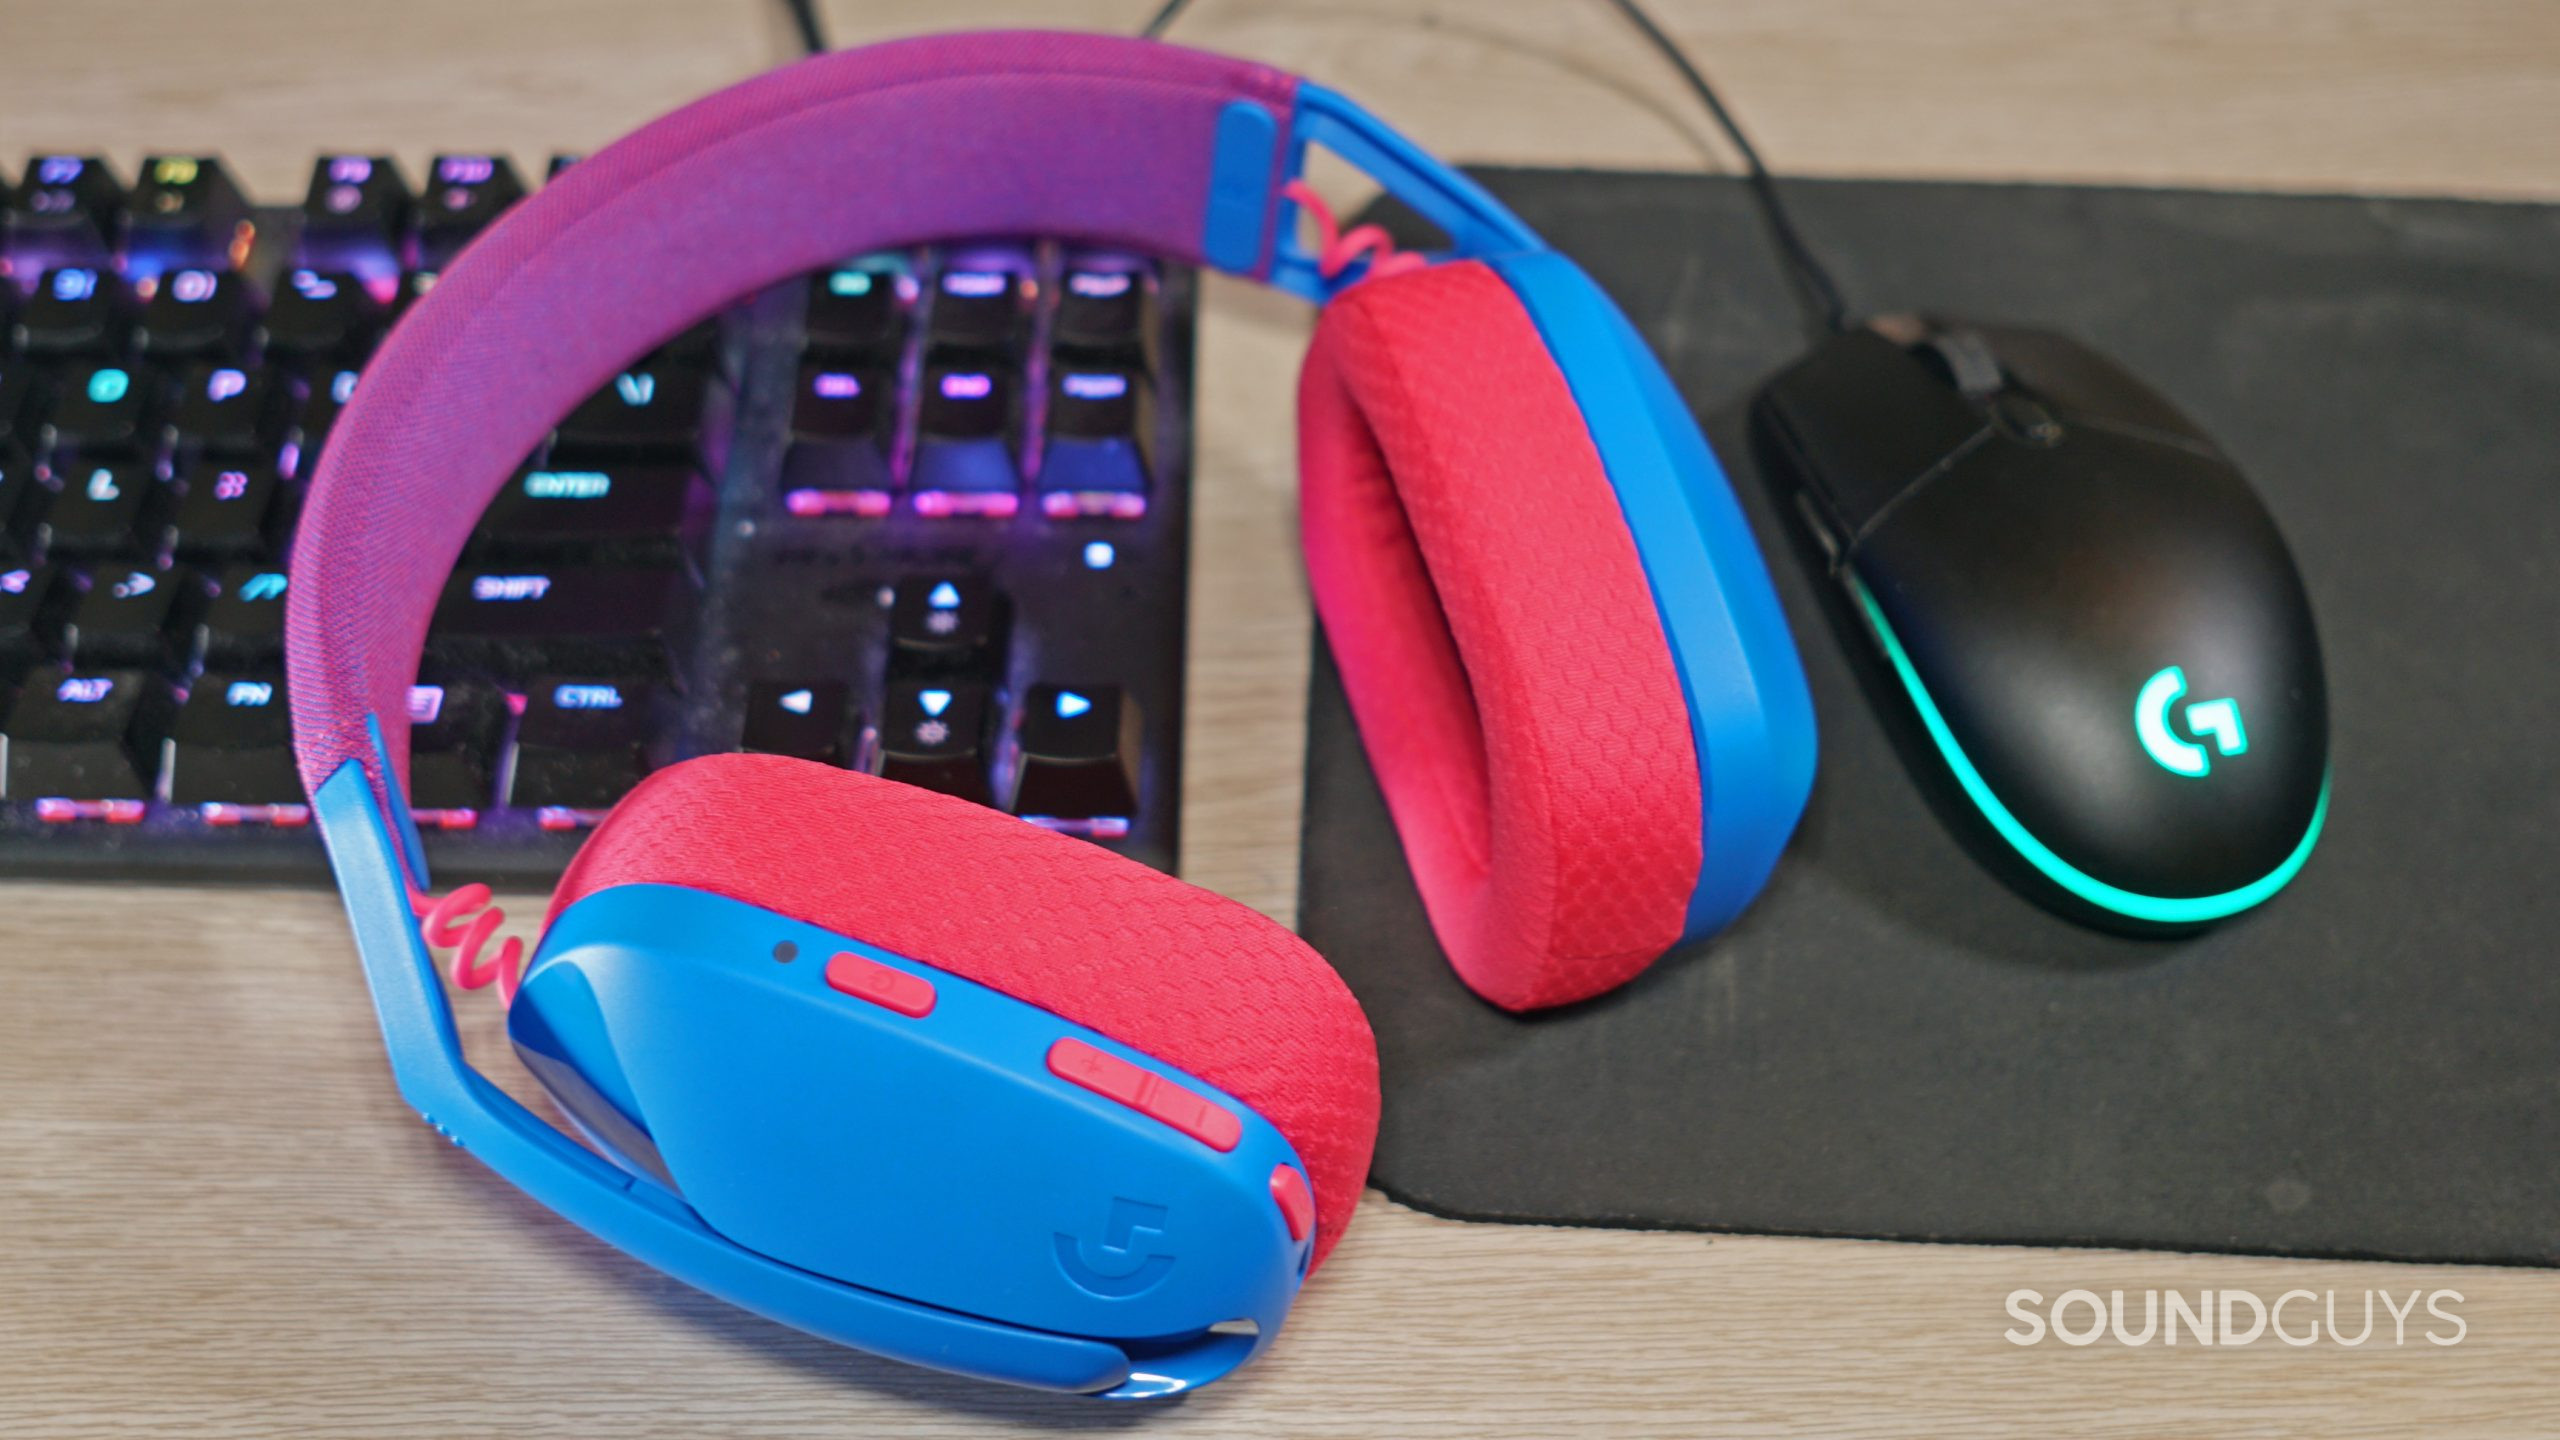 The Logitech G435 Lightspeed gaming headset lays on a desk next to a Logitech gaming mouse and a HyperX mechanical gaming keyboard.